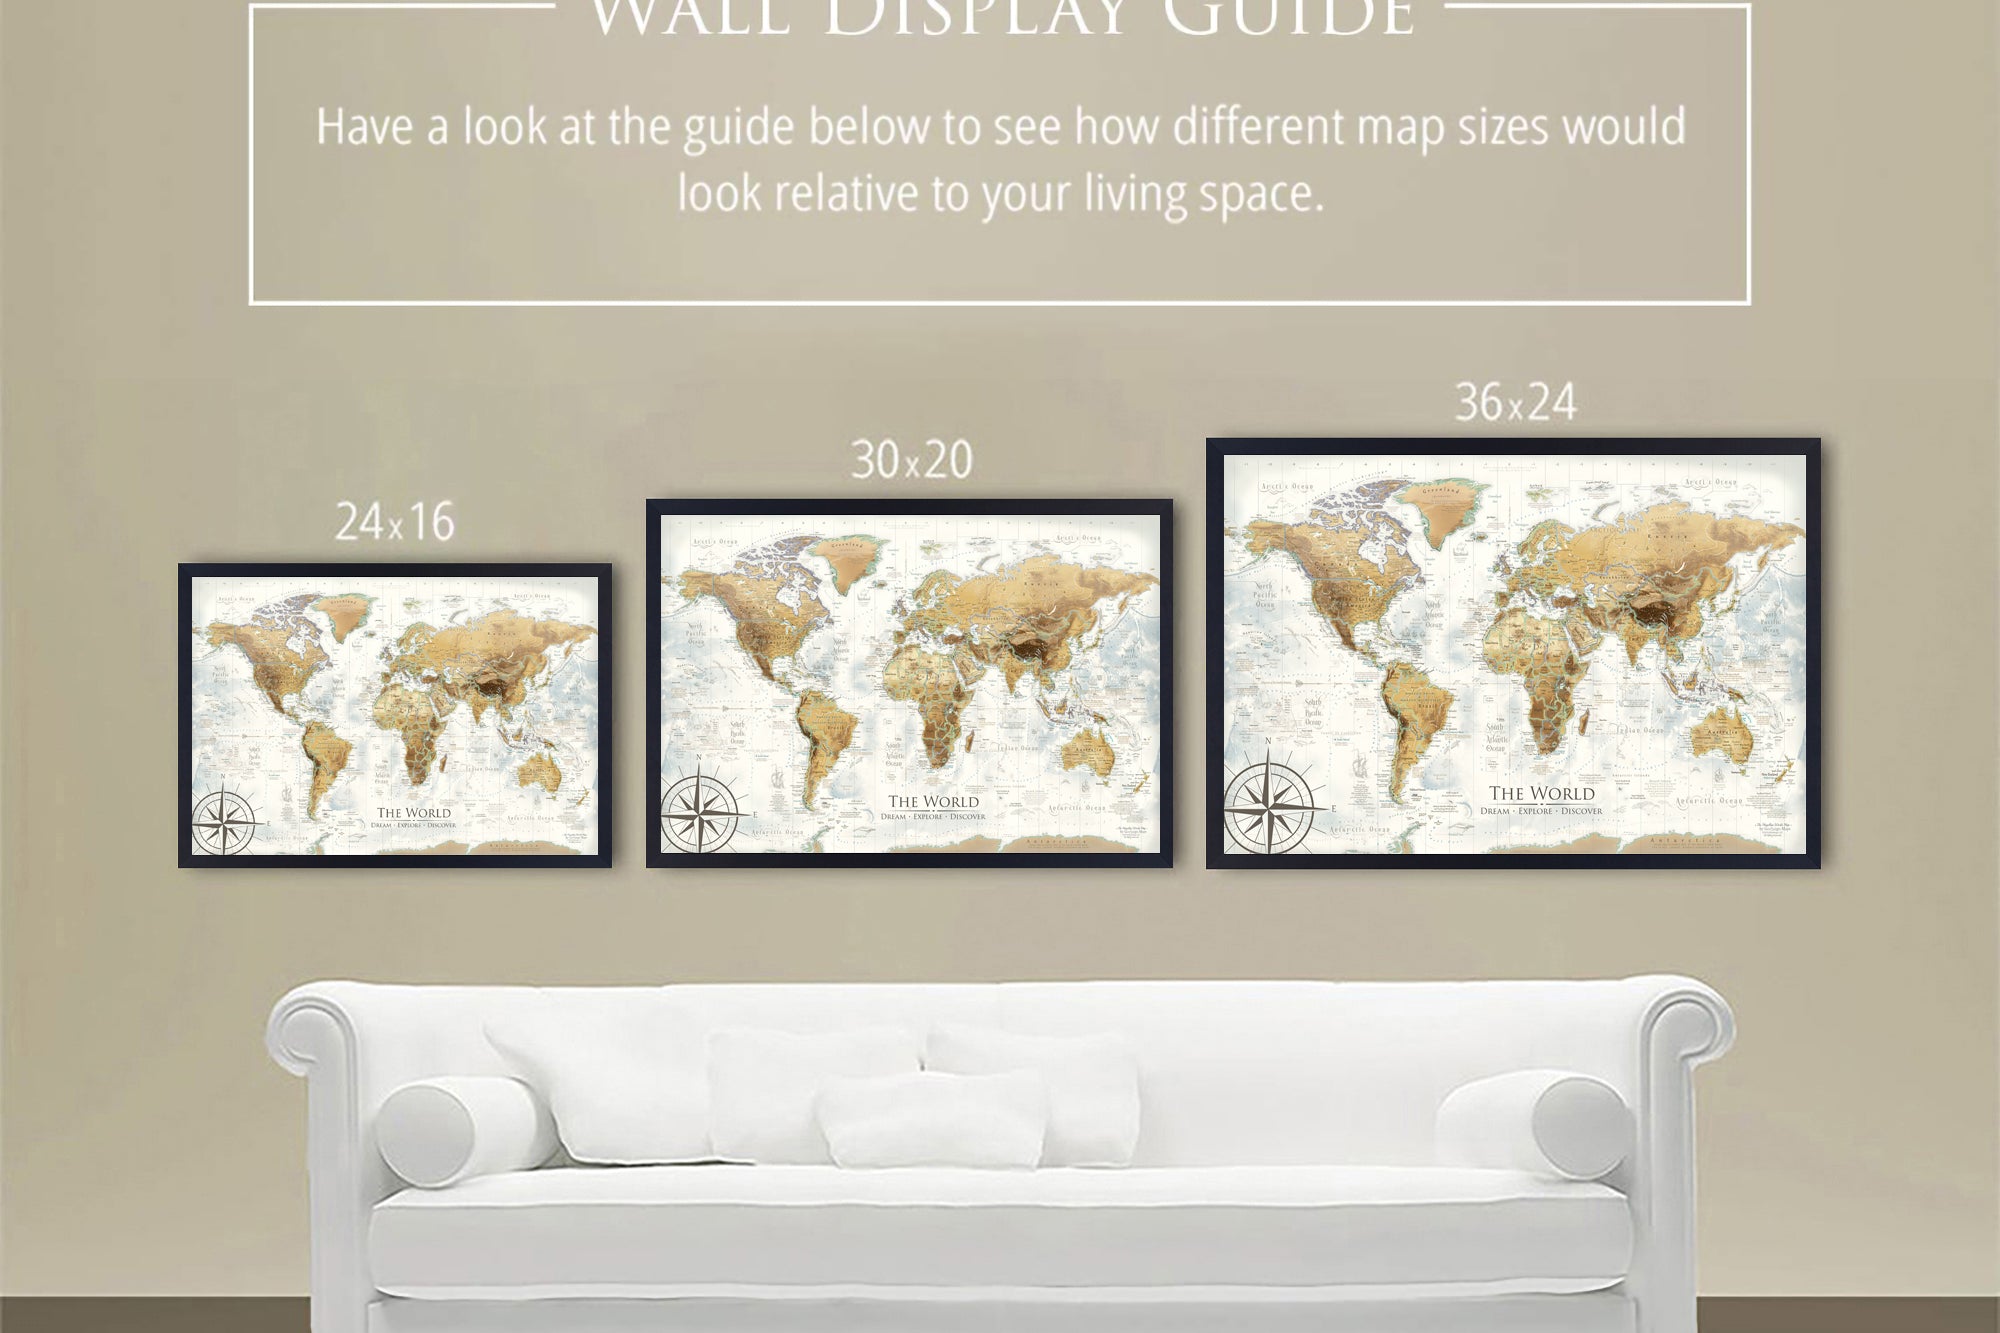 Wall Display Guide - Size Comparison for types of world maps